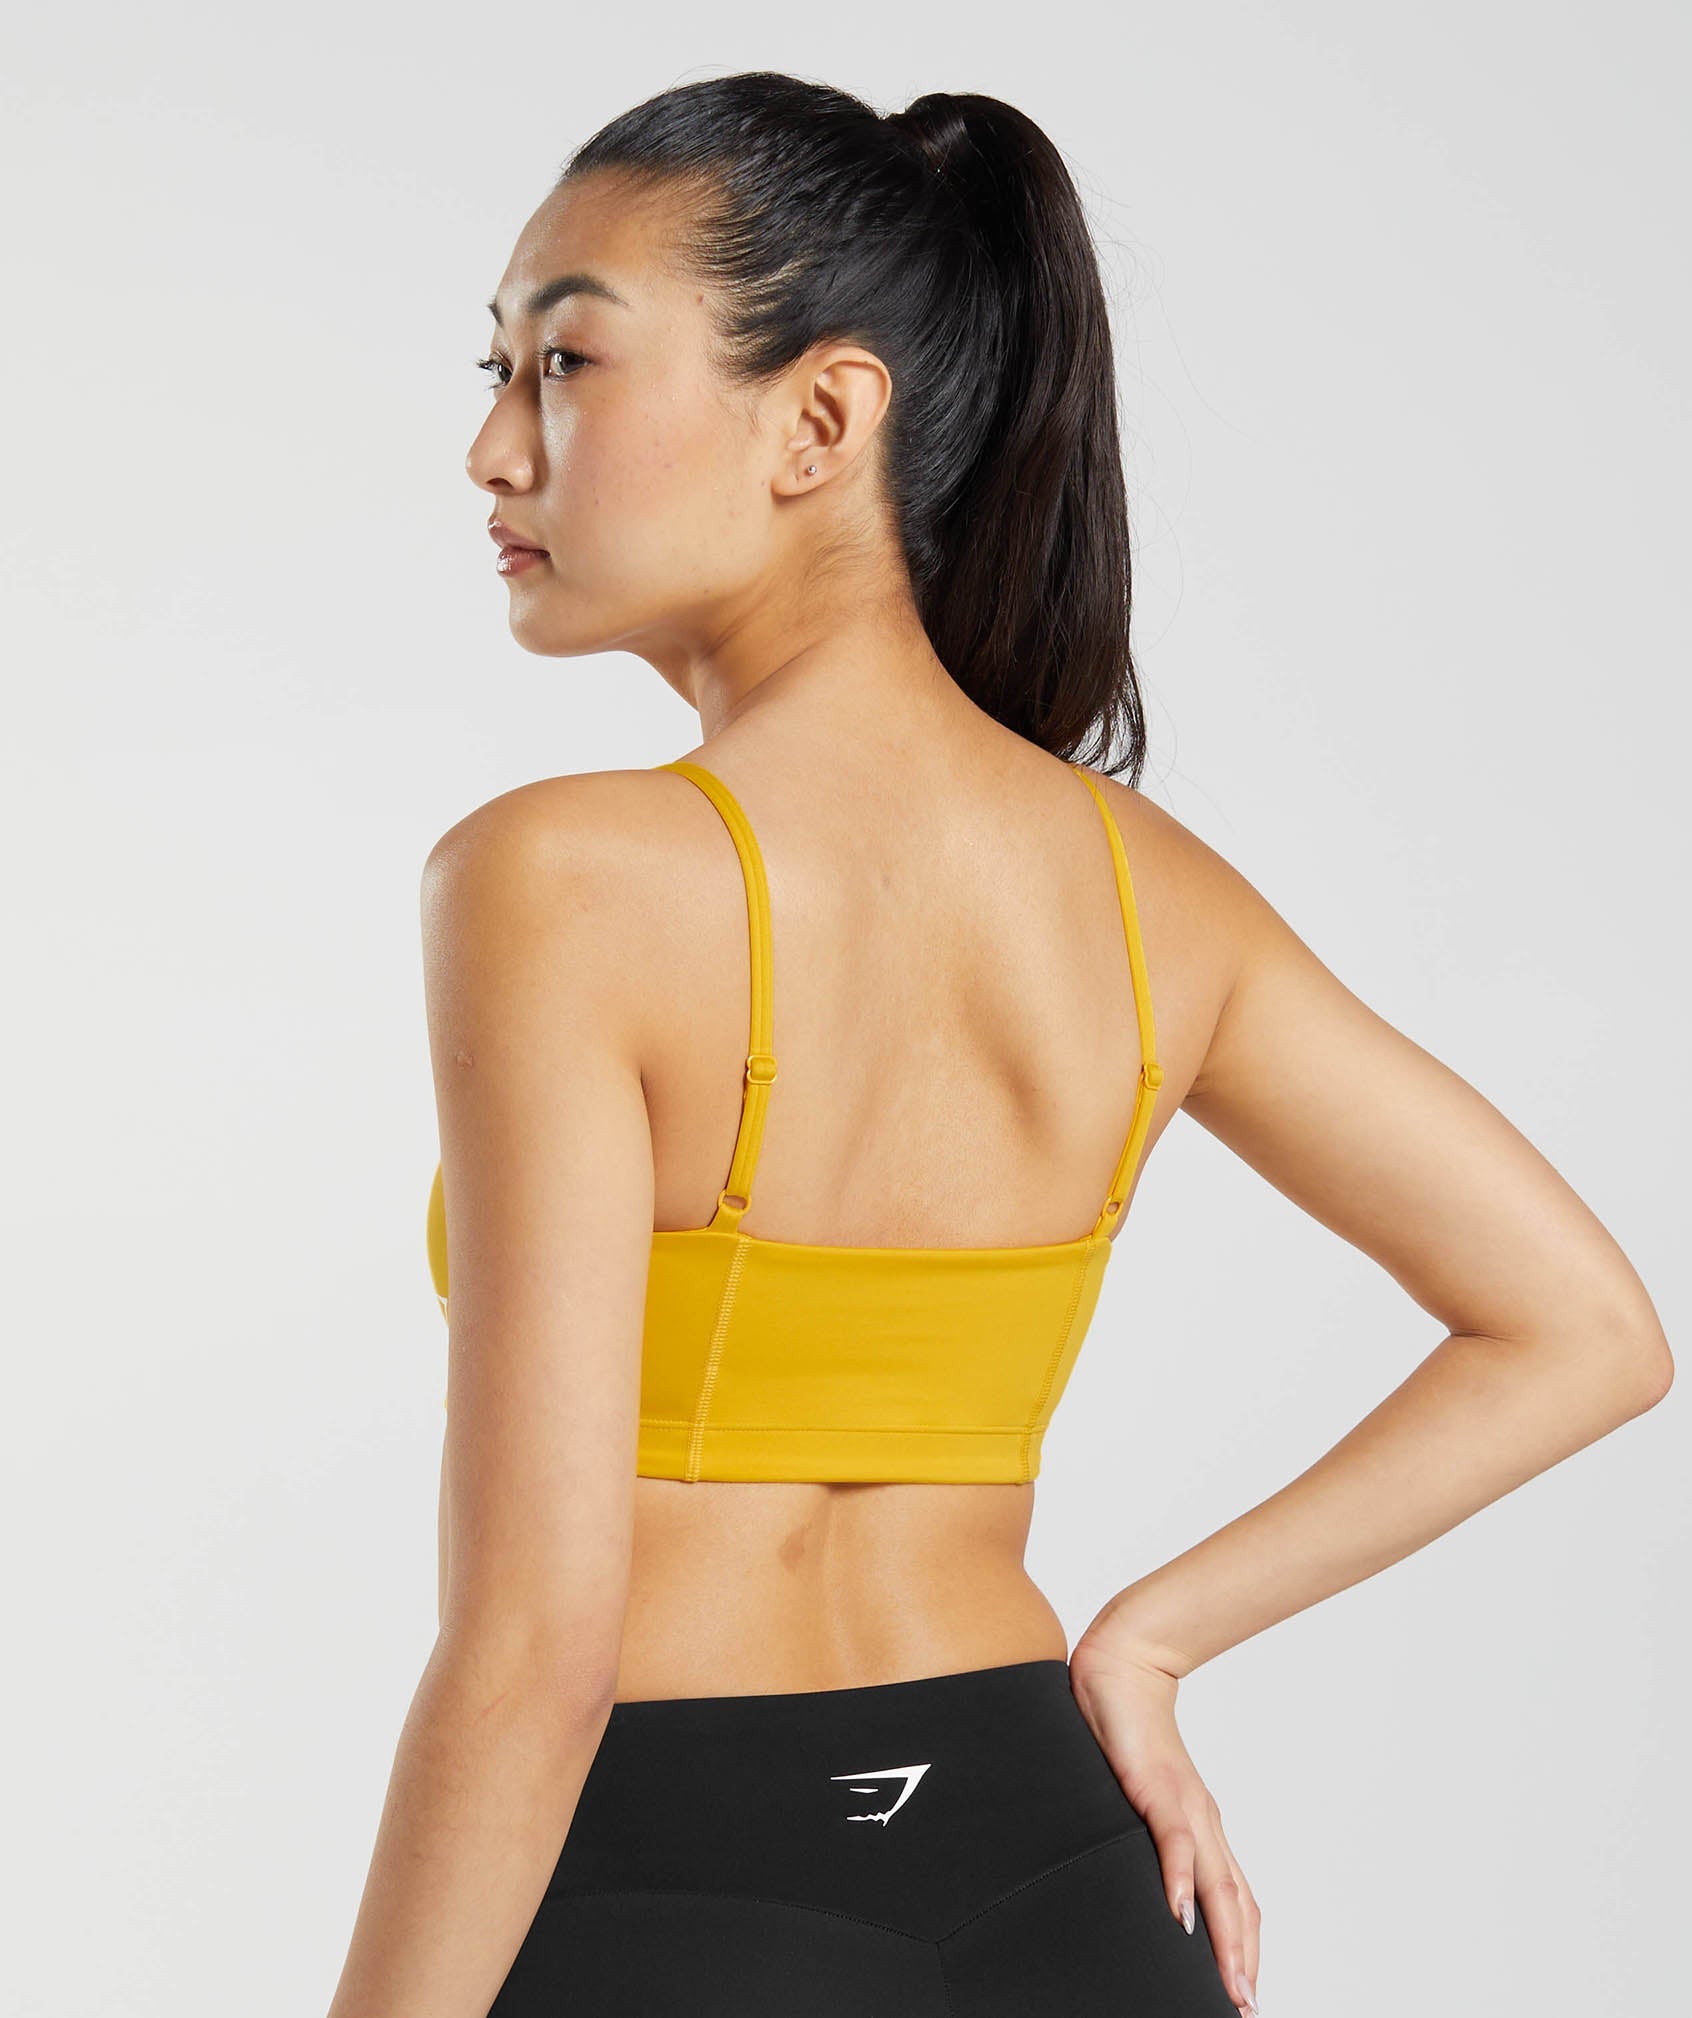 Bandeau Sports Bra in Spectra Yellow - view 2